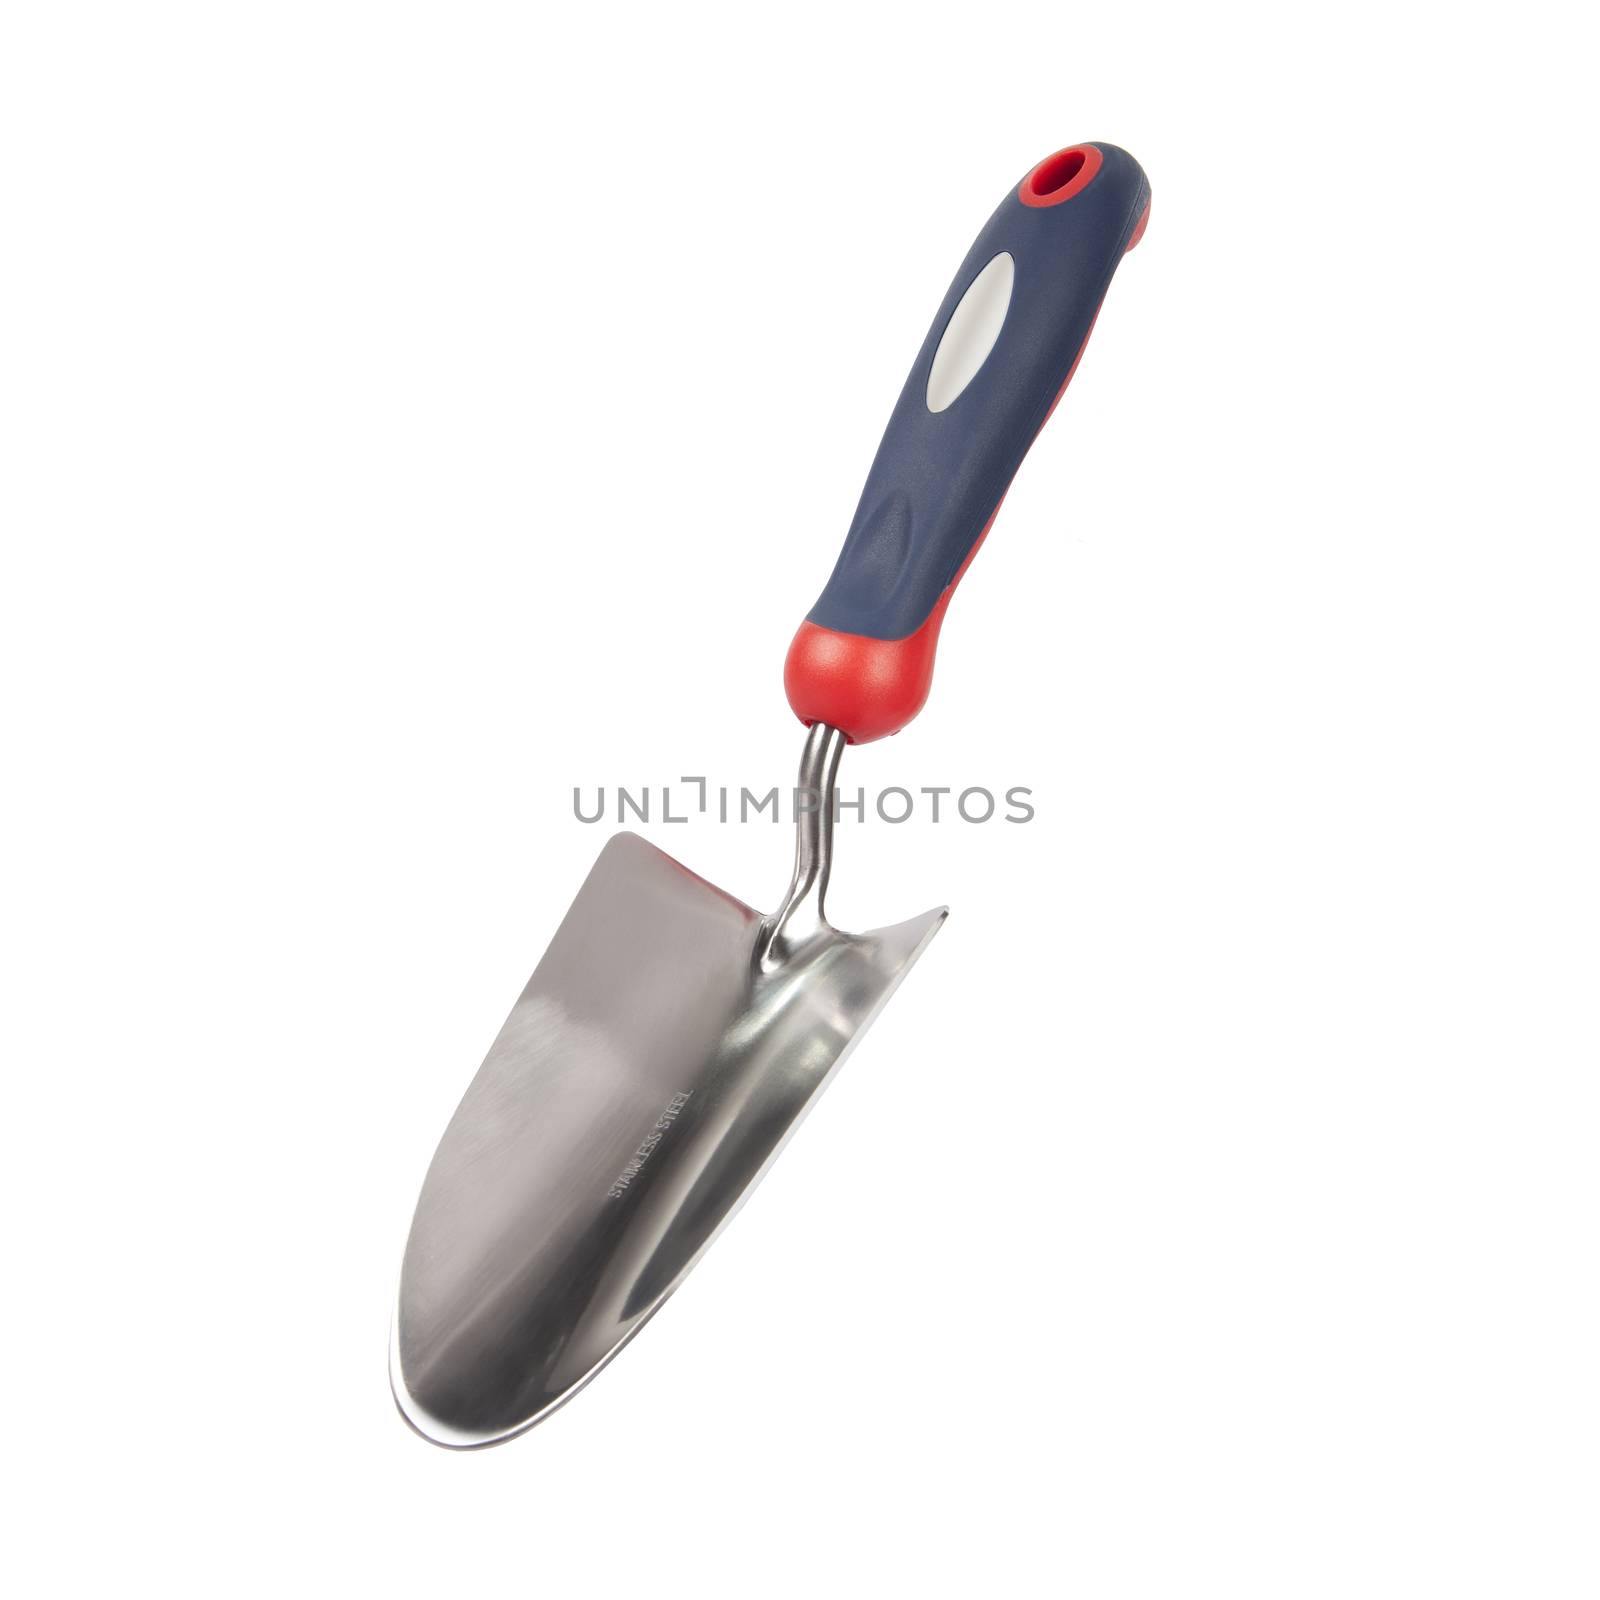 Trowel by VivacityImages